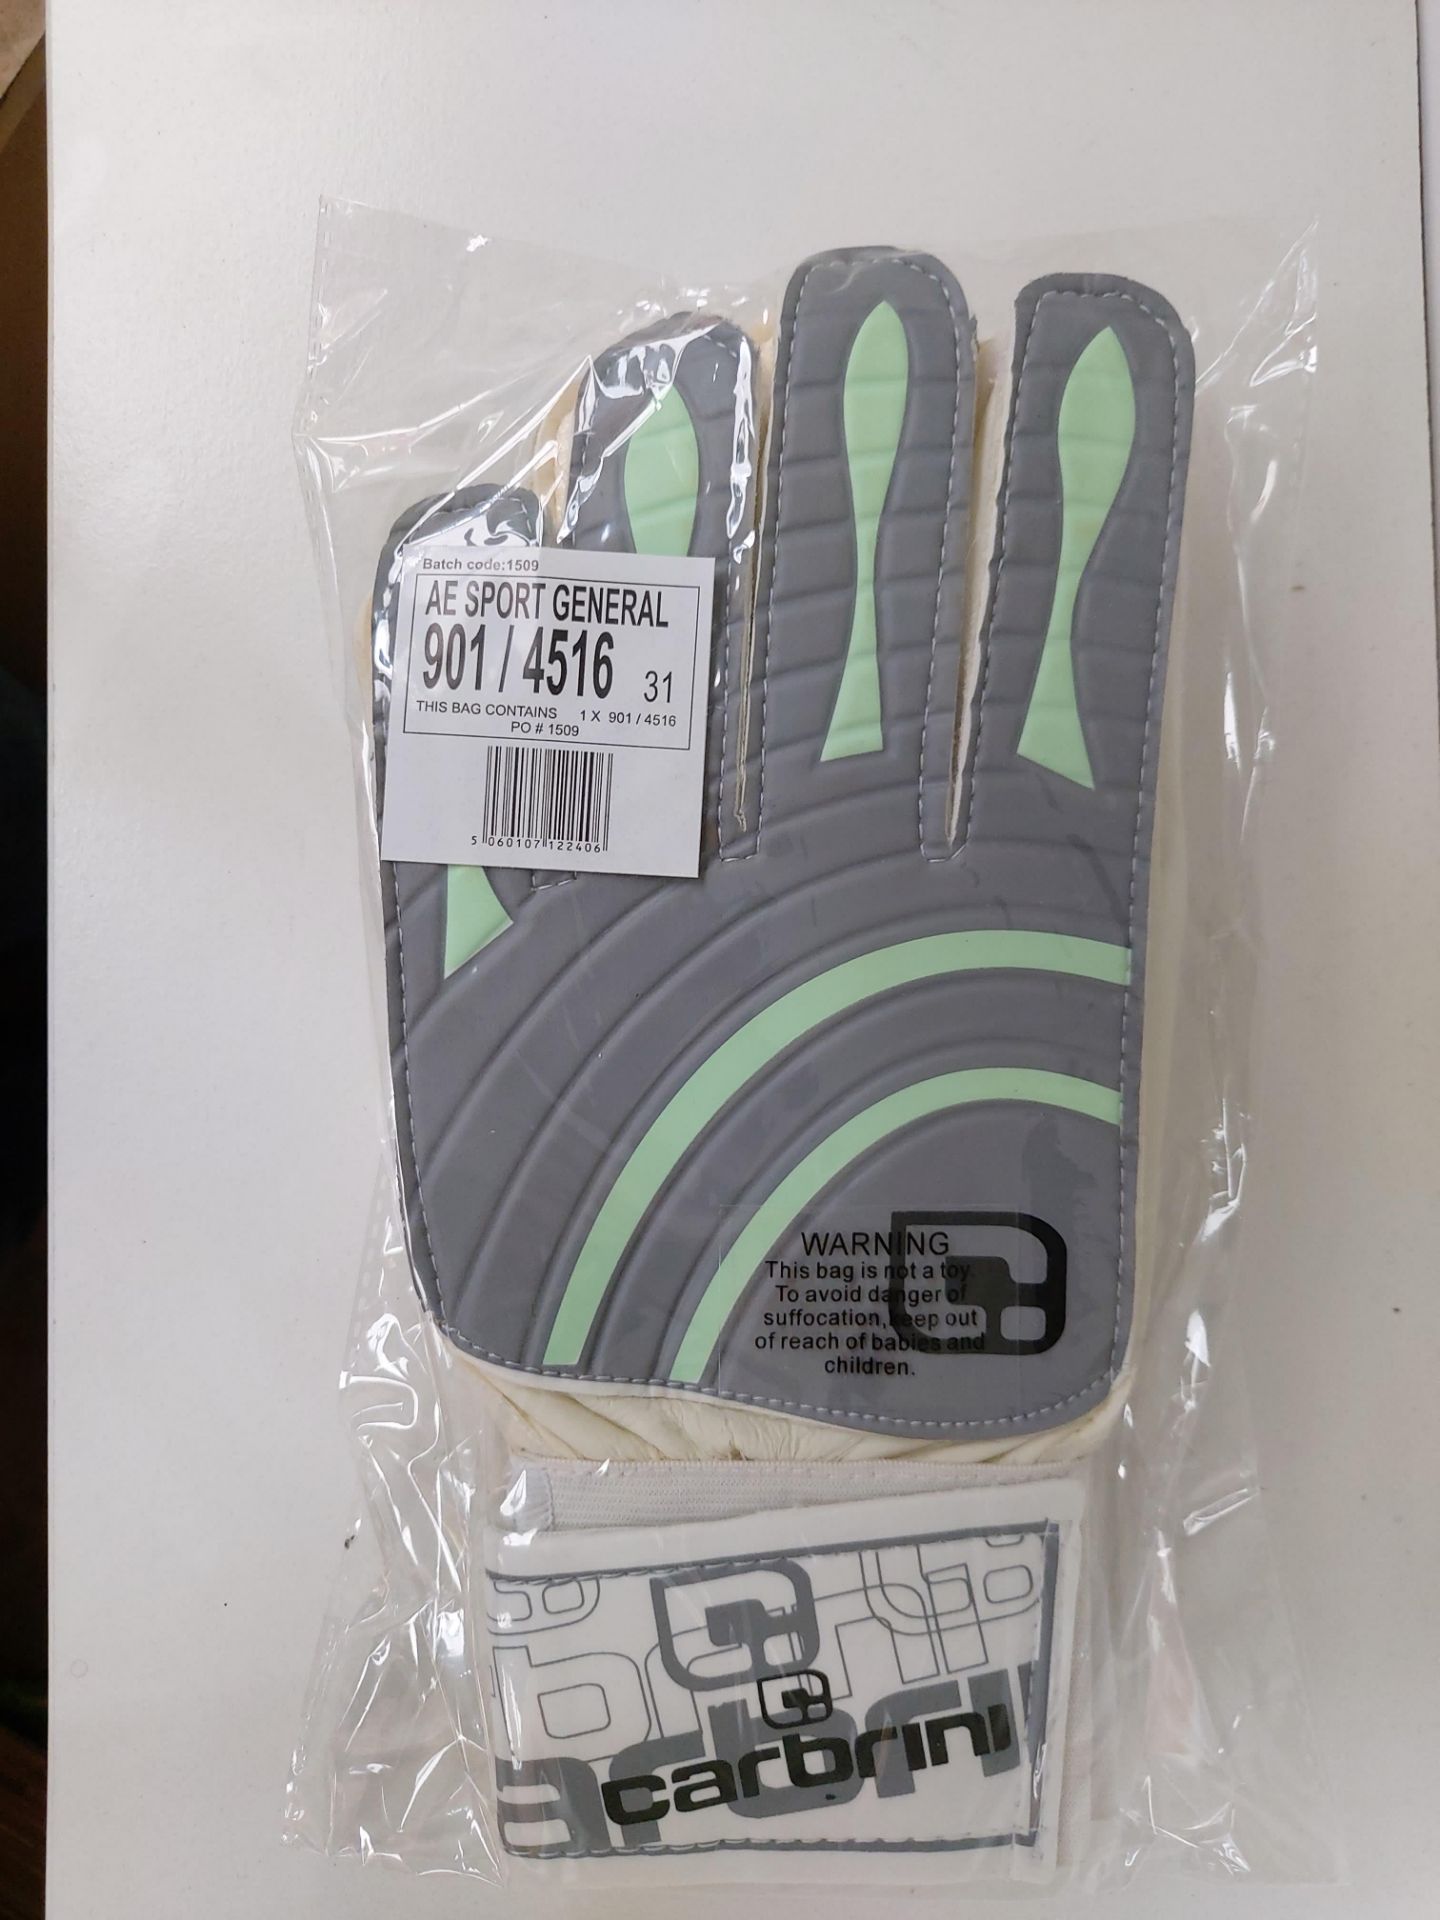 100 X Carbrini Junior Football Gloves Brand New In Packaging Rrp £9.99 - Image 2 of 2